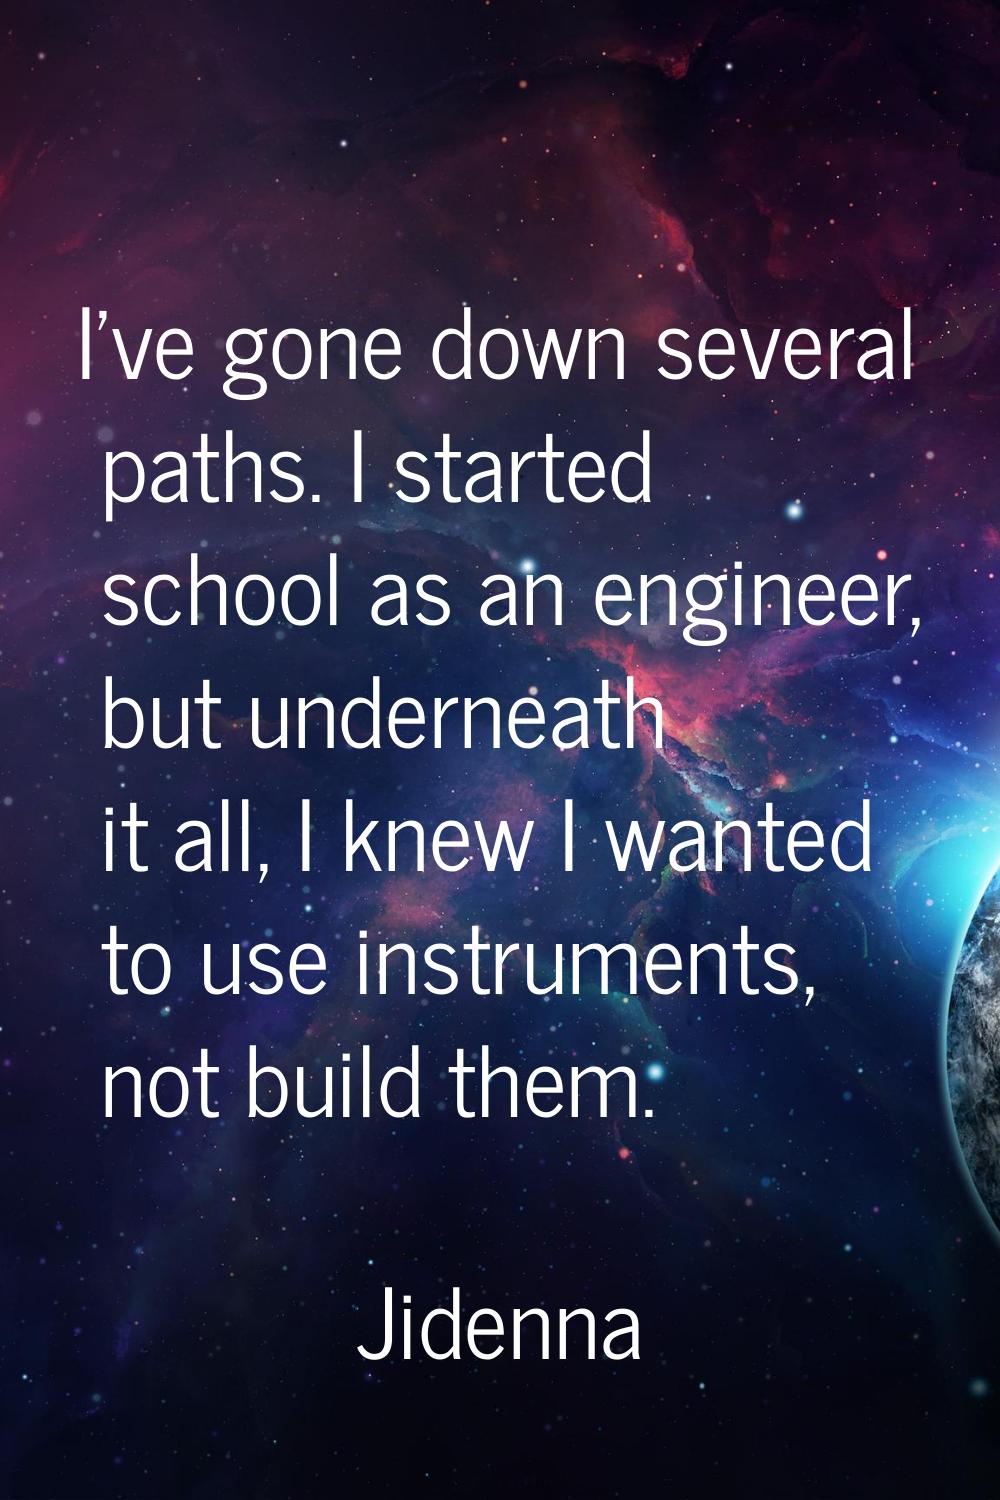 I've gone down several paths. I started school as an engineer, but underneath it all, I knew I want